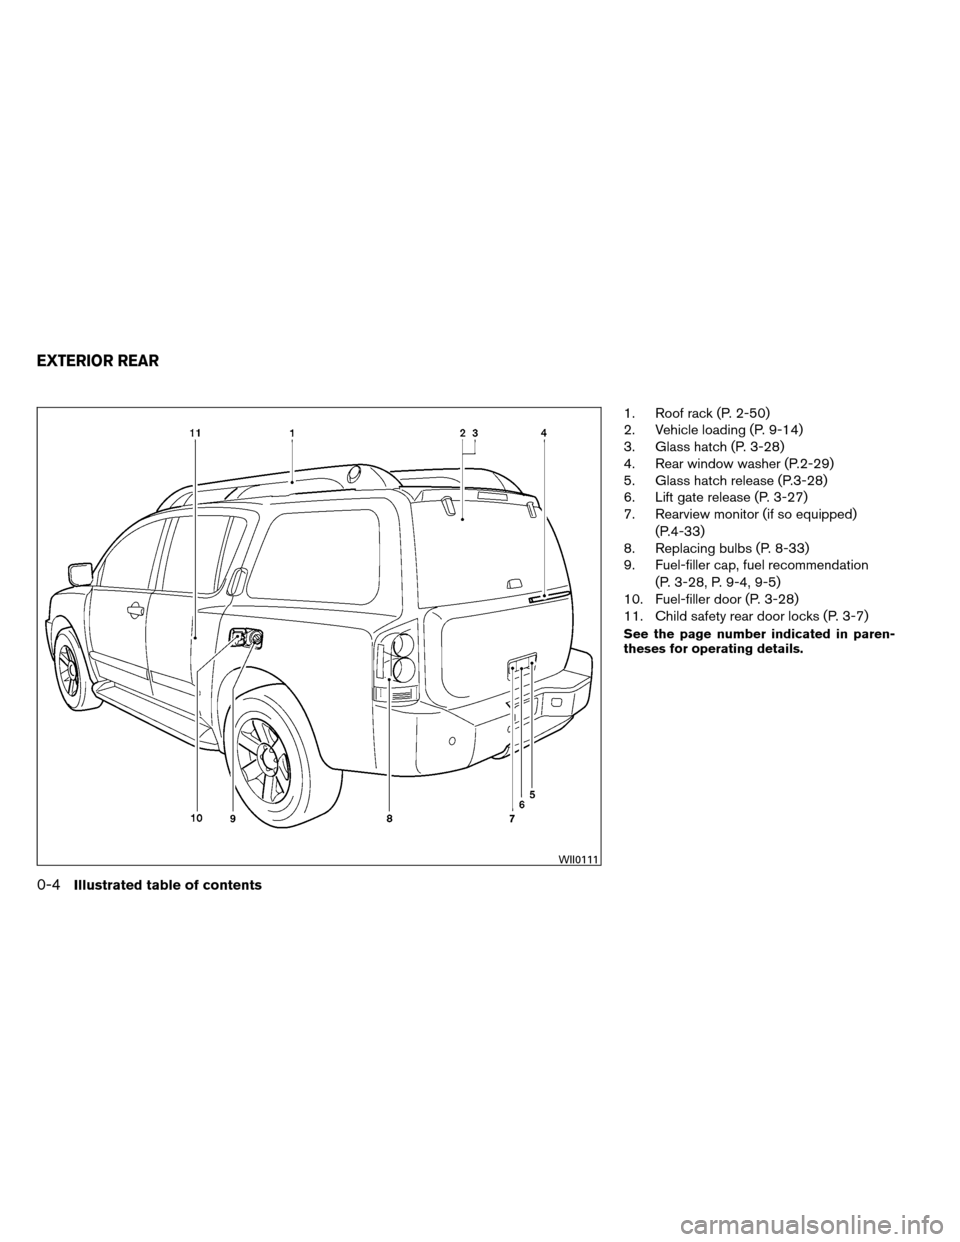 NISSAN ARMADA 2012 1.G User Guide 1. Roof rack (P. 2-50)
2. Vehicle loading (P. 9-14)
3. Glass hatch (P. 3-28)
4. Rear window washer (P.2-29)
5. Glass hatch release (P.3-28)
6. Lift gate release (P. 3-27)
7. Rearview monitor (if so eq